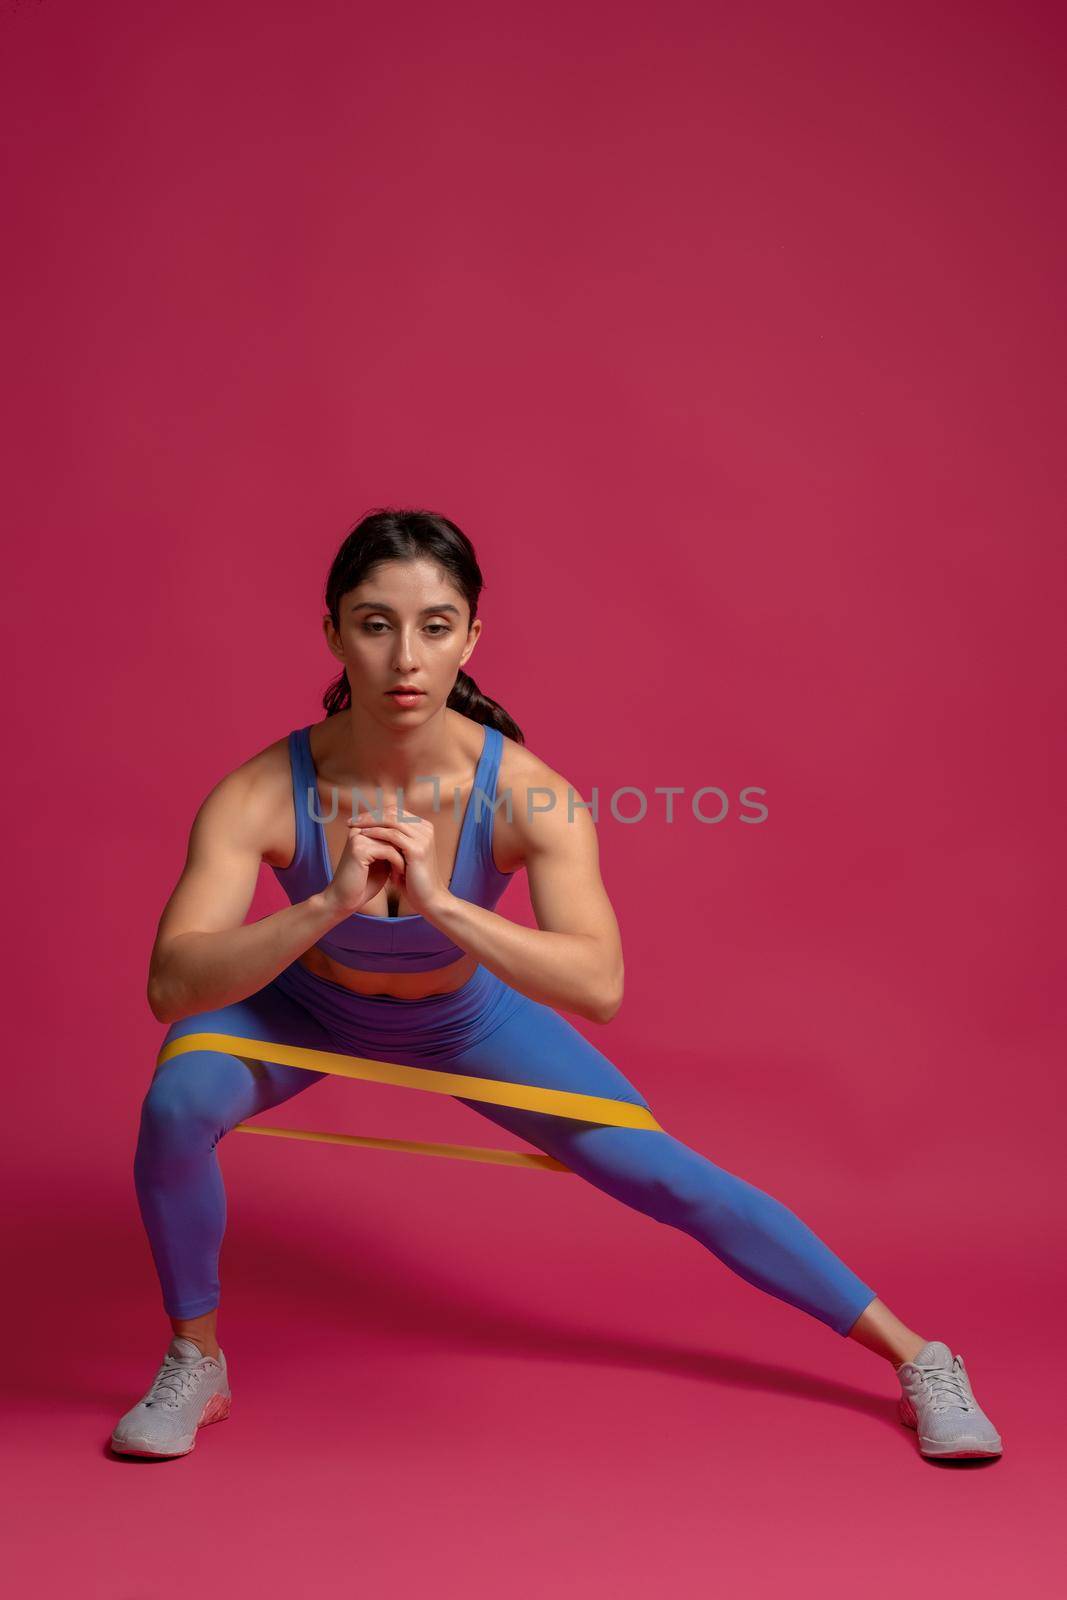 Athletic girl working out in studio interior on maroon background, doing lateral lunge to right with resistance loop band. Leg and glute workout. Active lifestyle and fitness concept